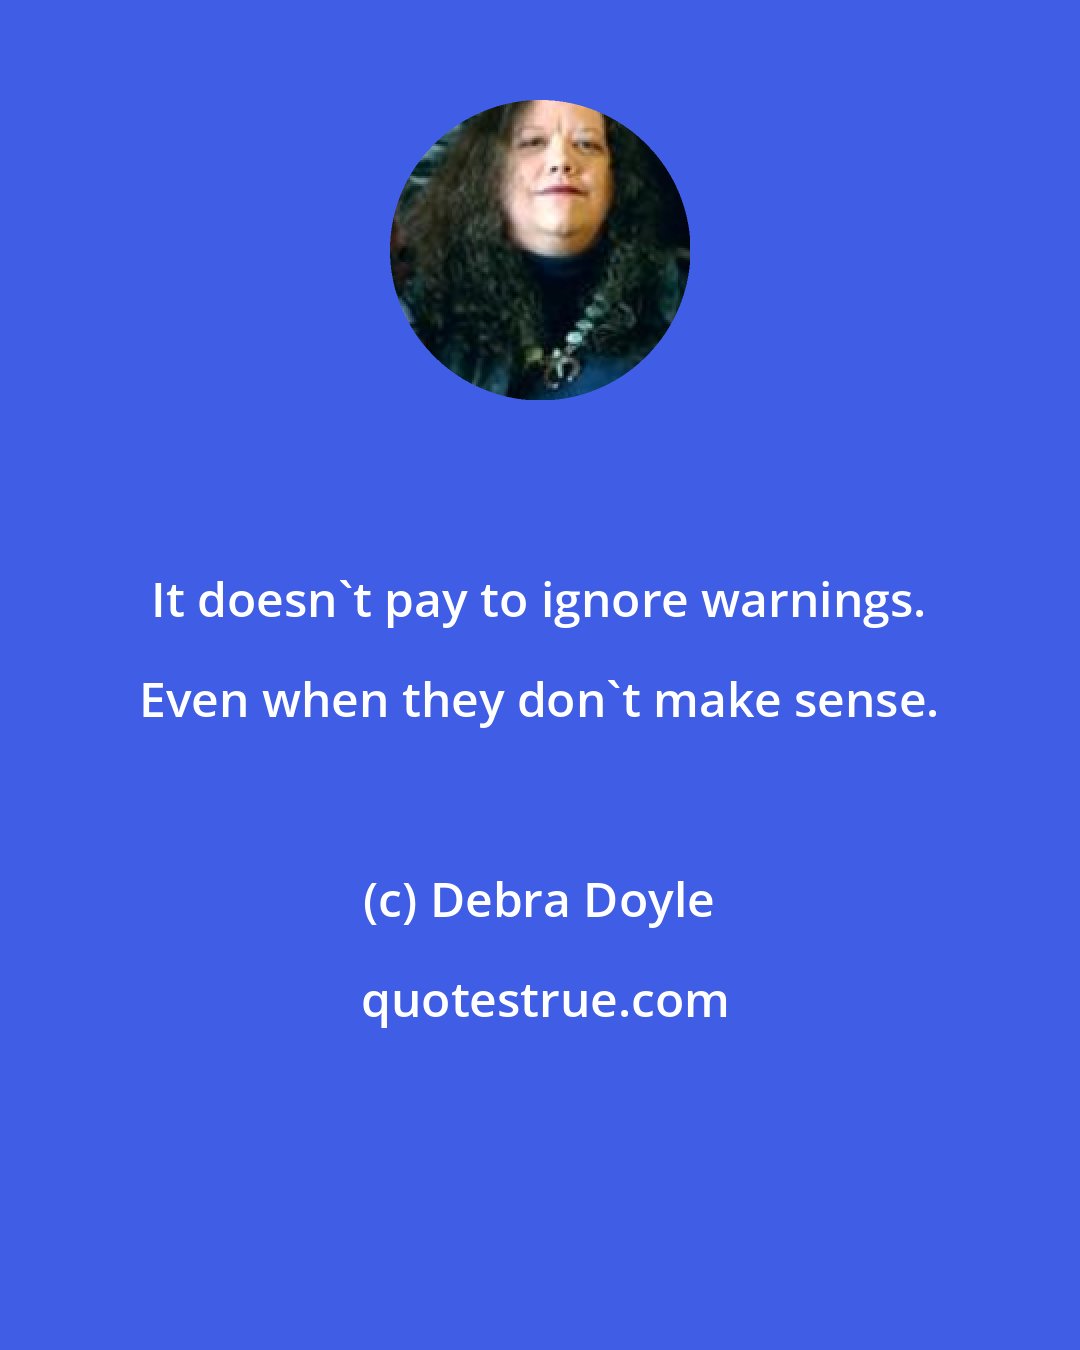 Debra Doyle: It doesn't pay to ignore warnings. Even when they don't make sense.